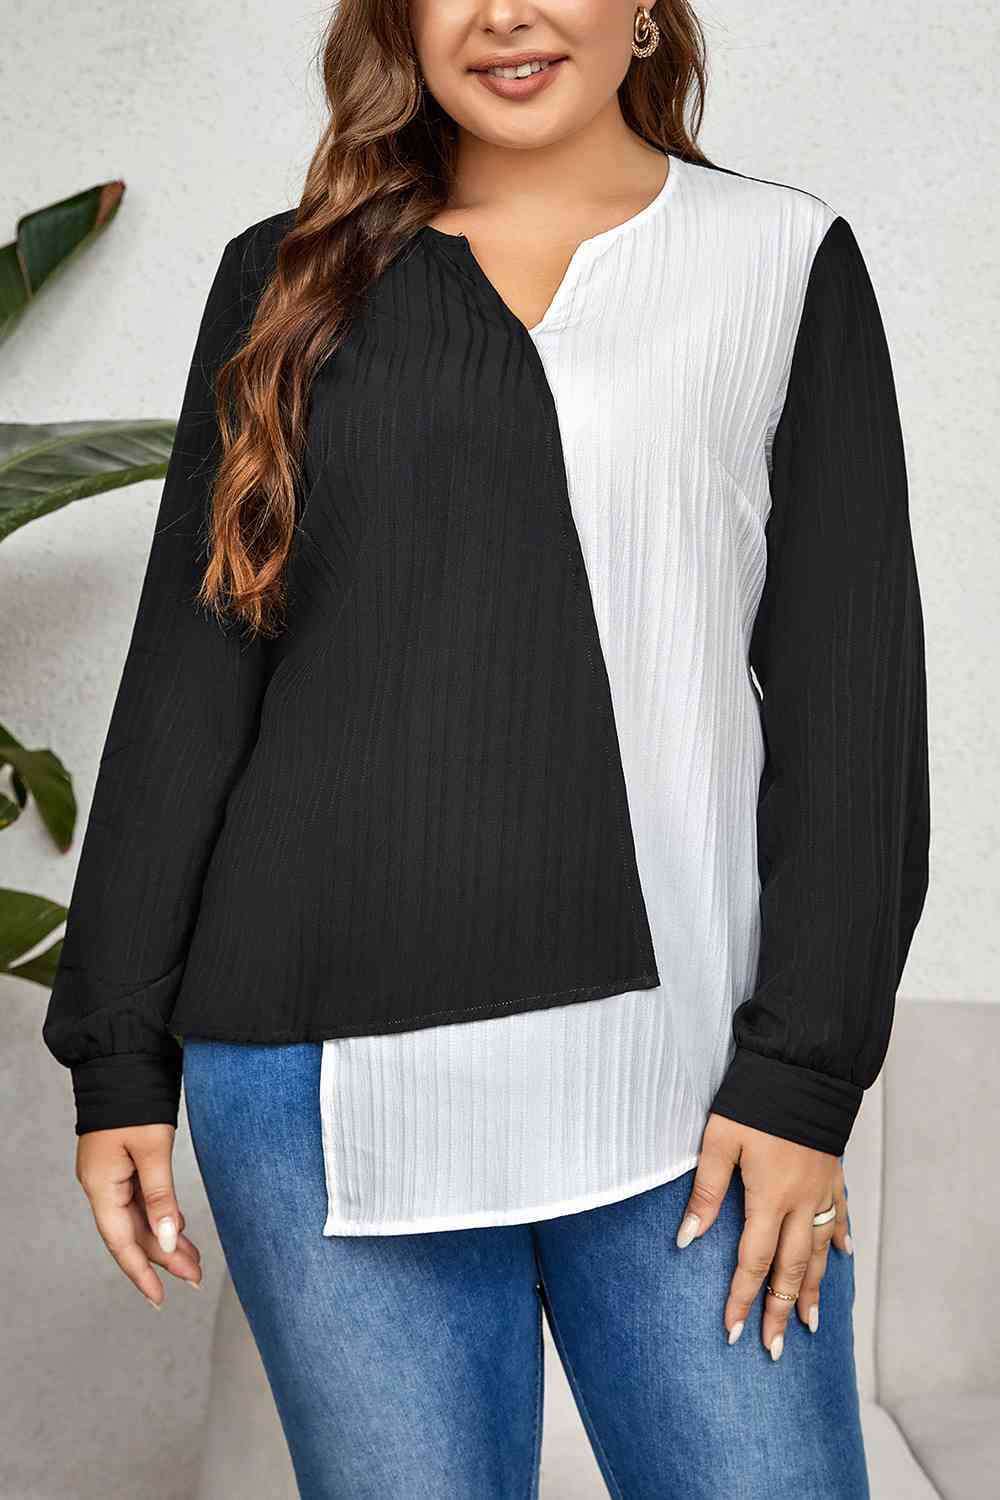 Plus Size Contrast Asymmetrical Long Sleeve Top - Just Enuff Sexy